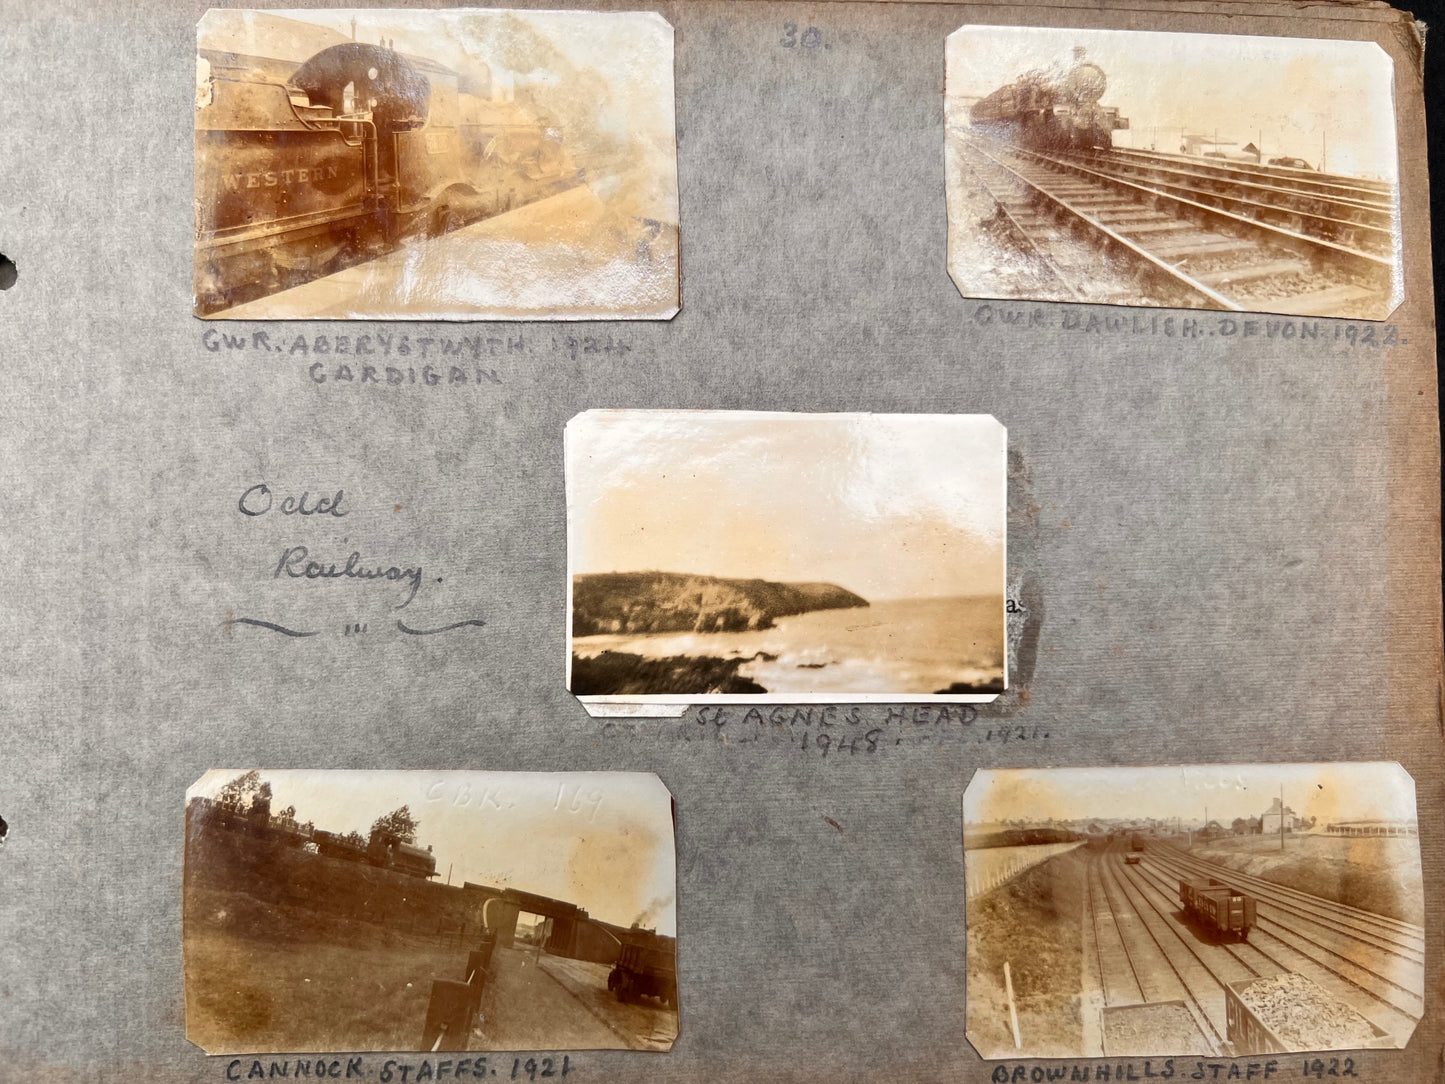 1920s Photograph Album with Lots of Photos of Trains, Cars, Boats